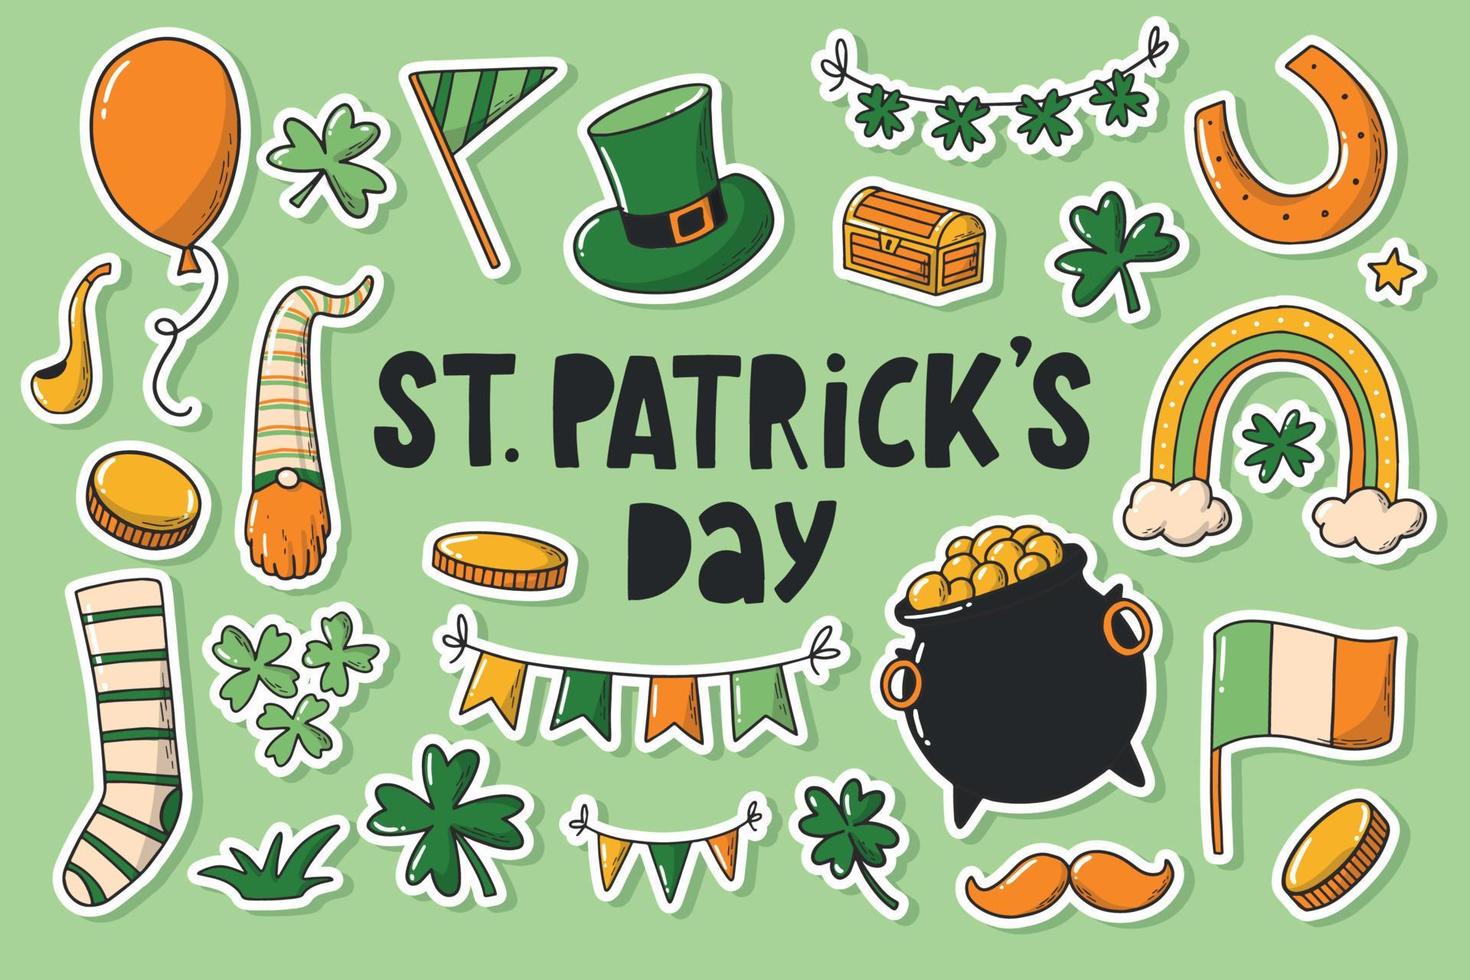 St. Patrick's day stickers, doodles, clipart. Good for labels, tags, prints, cards, posters, etc. EPS 10 vector